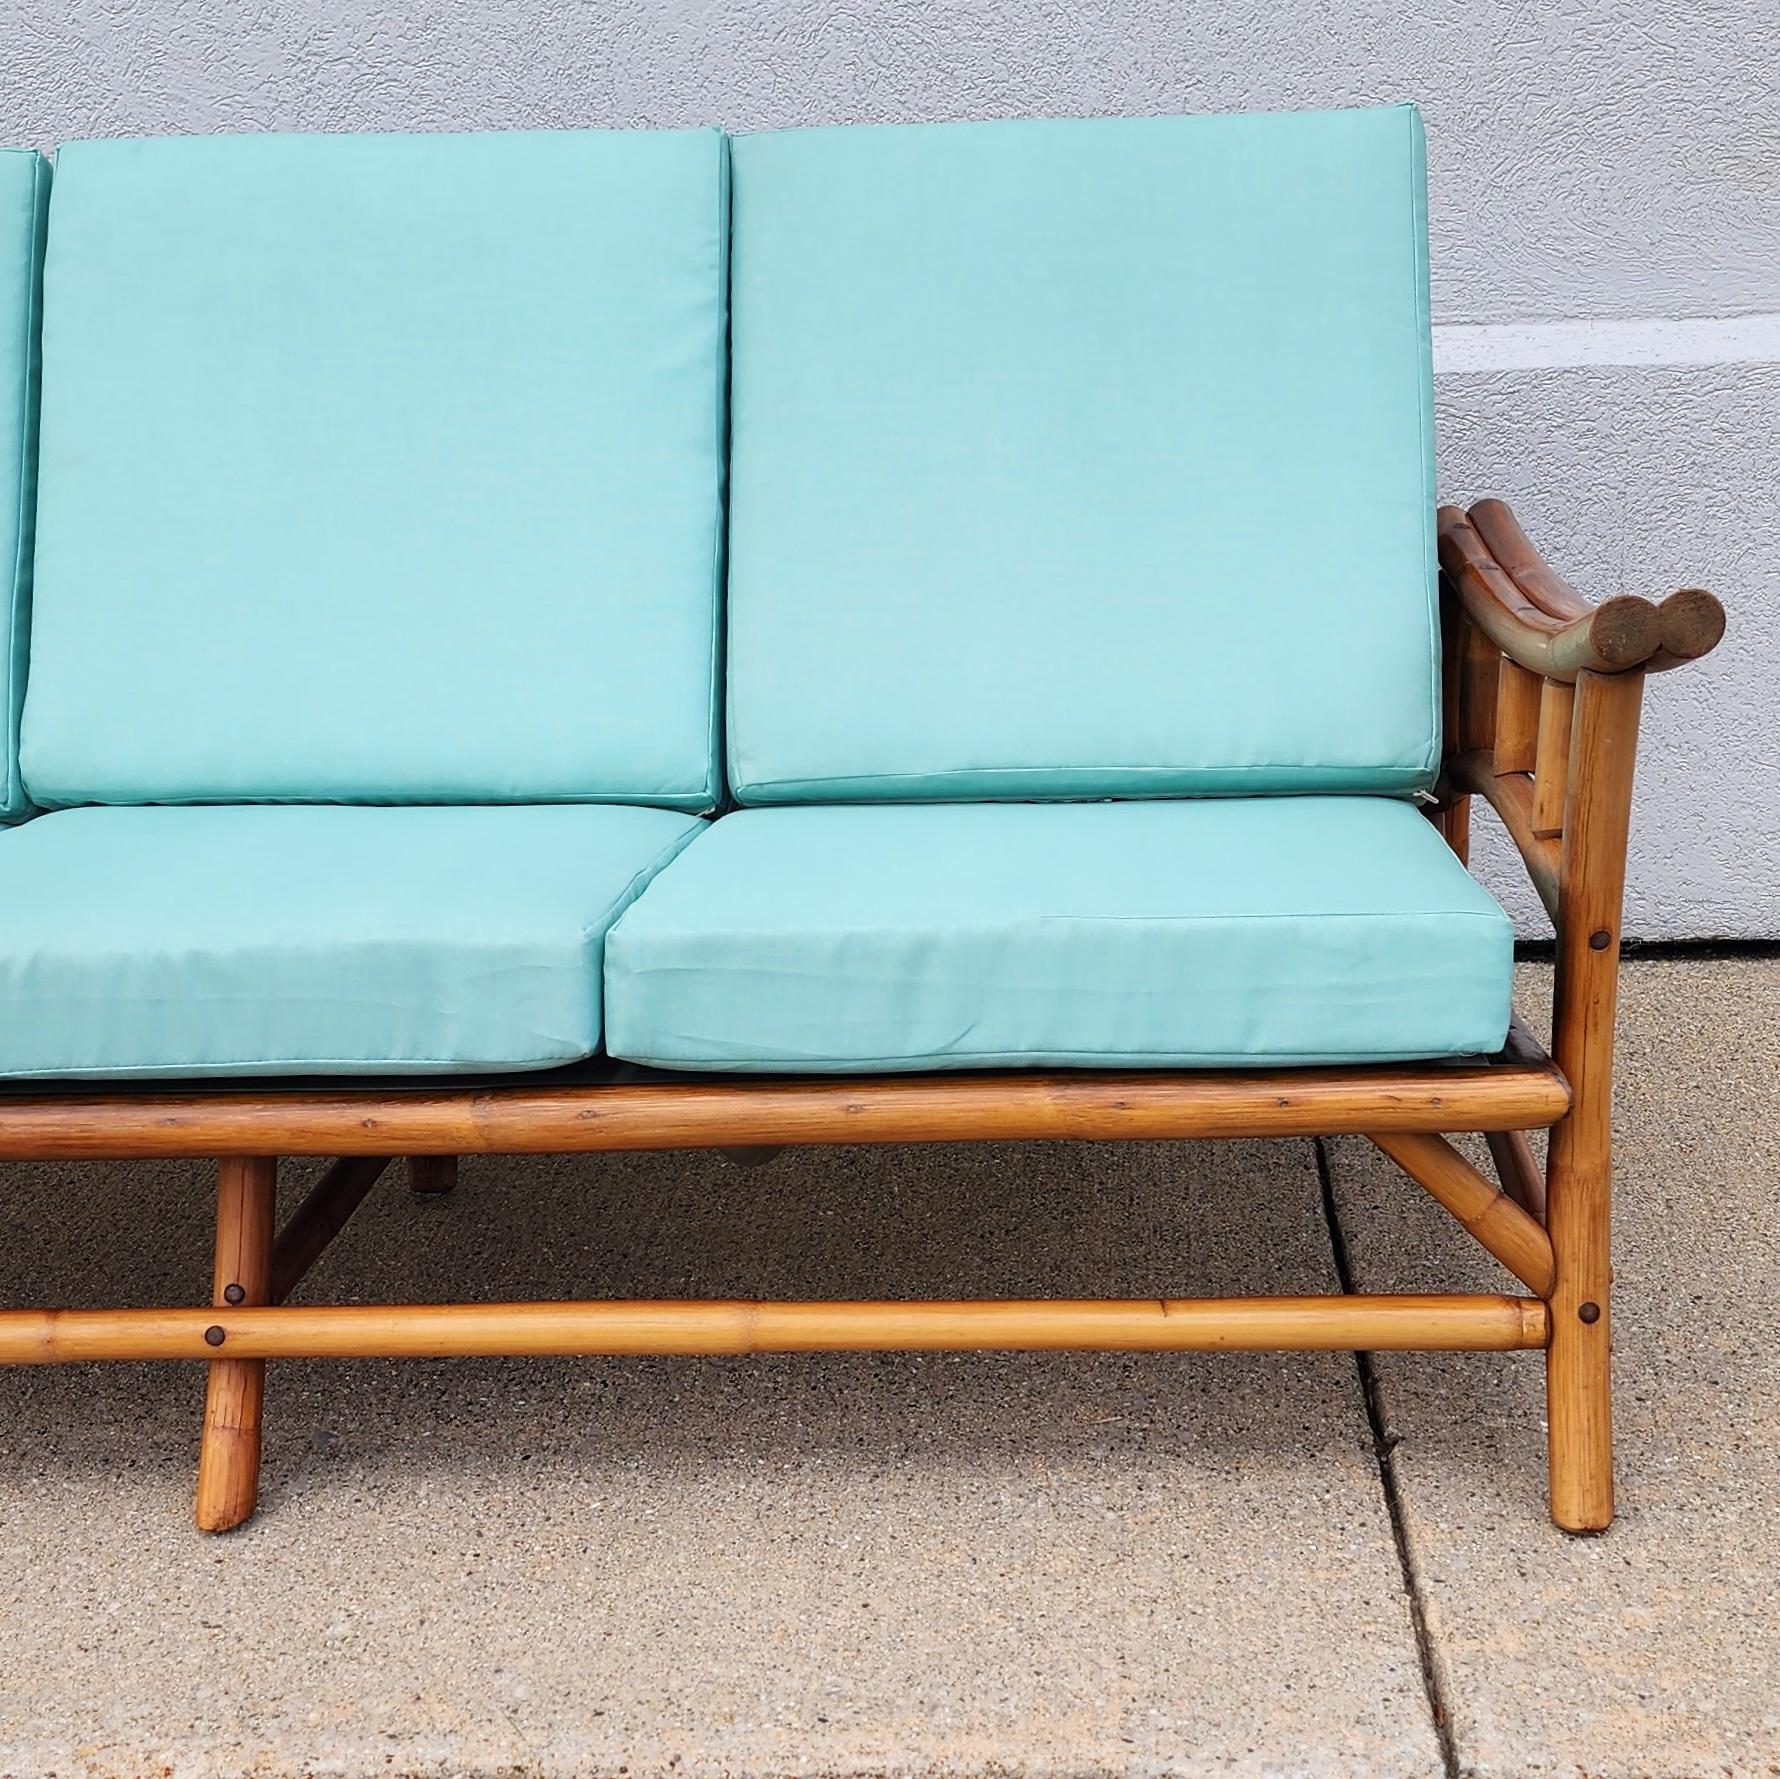 20th Century Mid-Century Vintage Midcentury Rattan Bamboo Couch with Turquoise Cushions